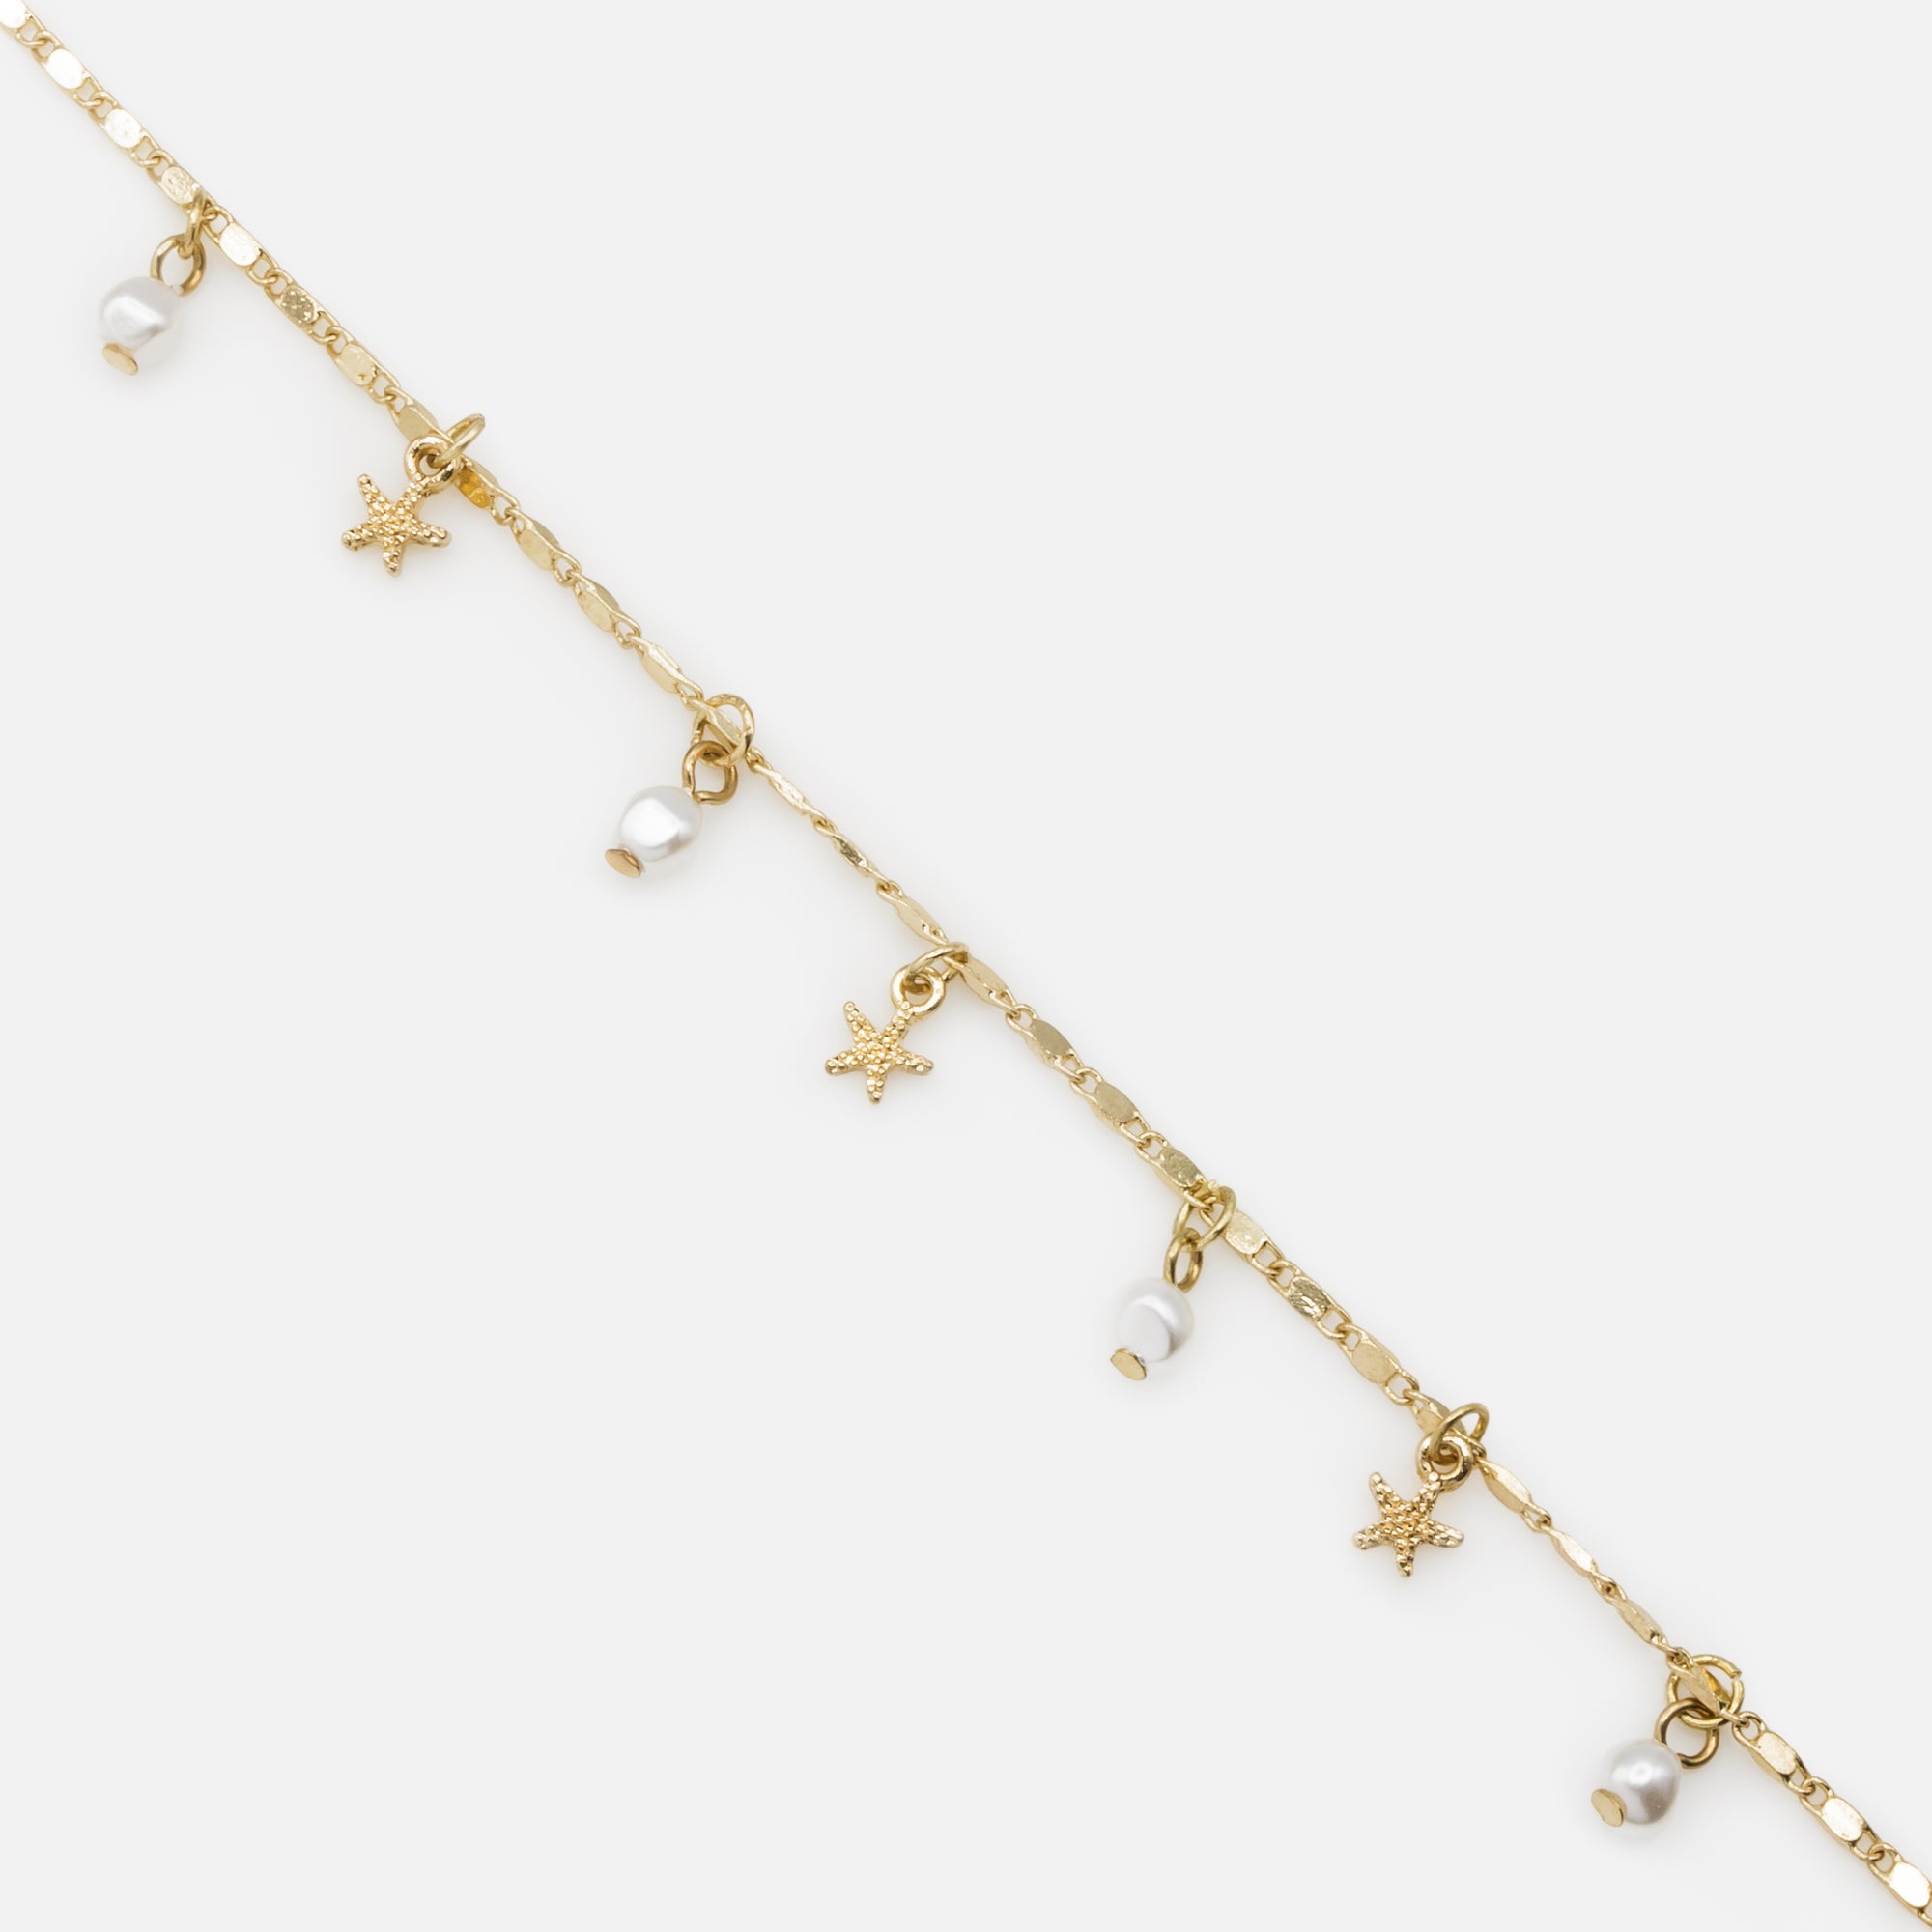 Gold anklet with pearls and starfish